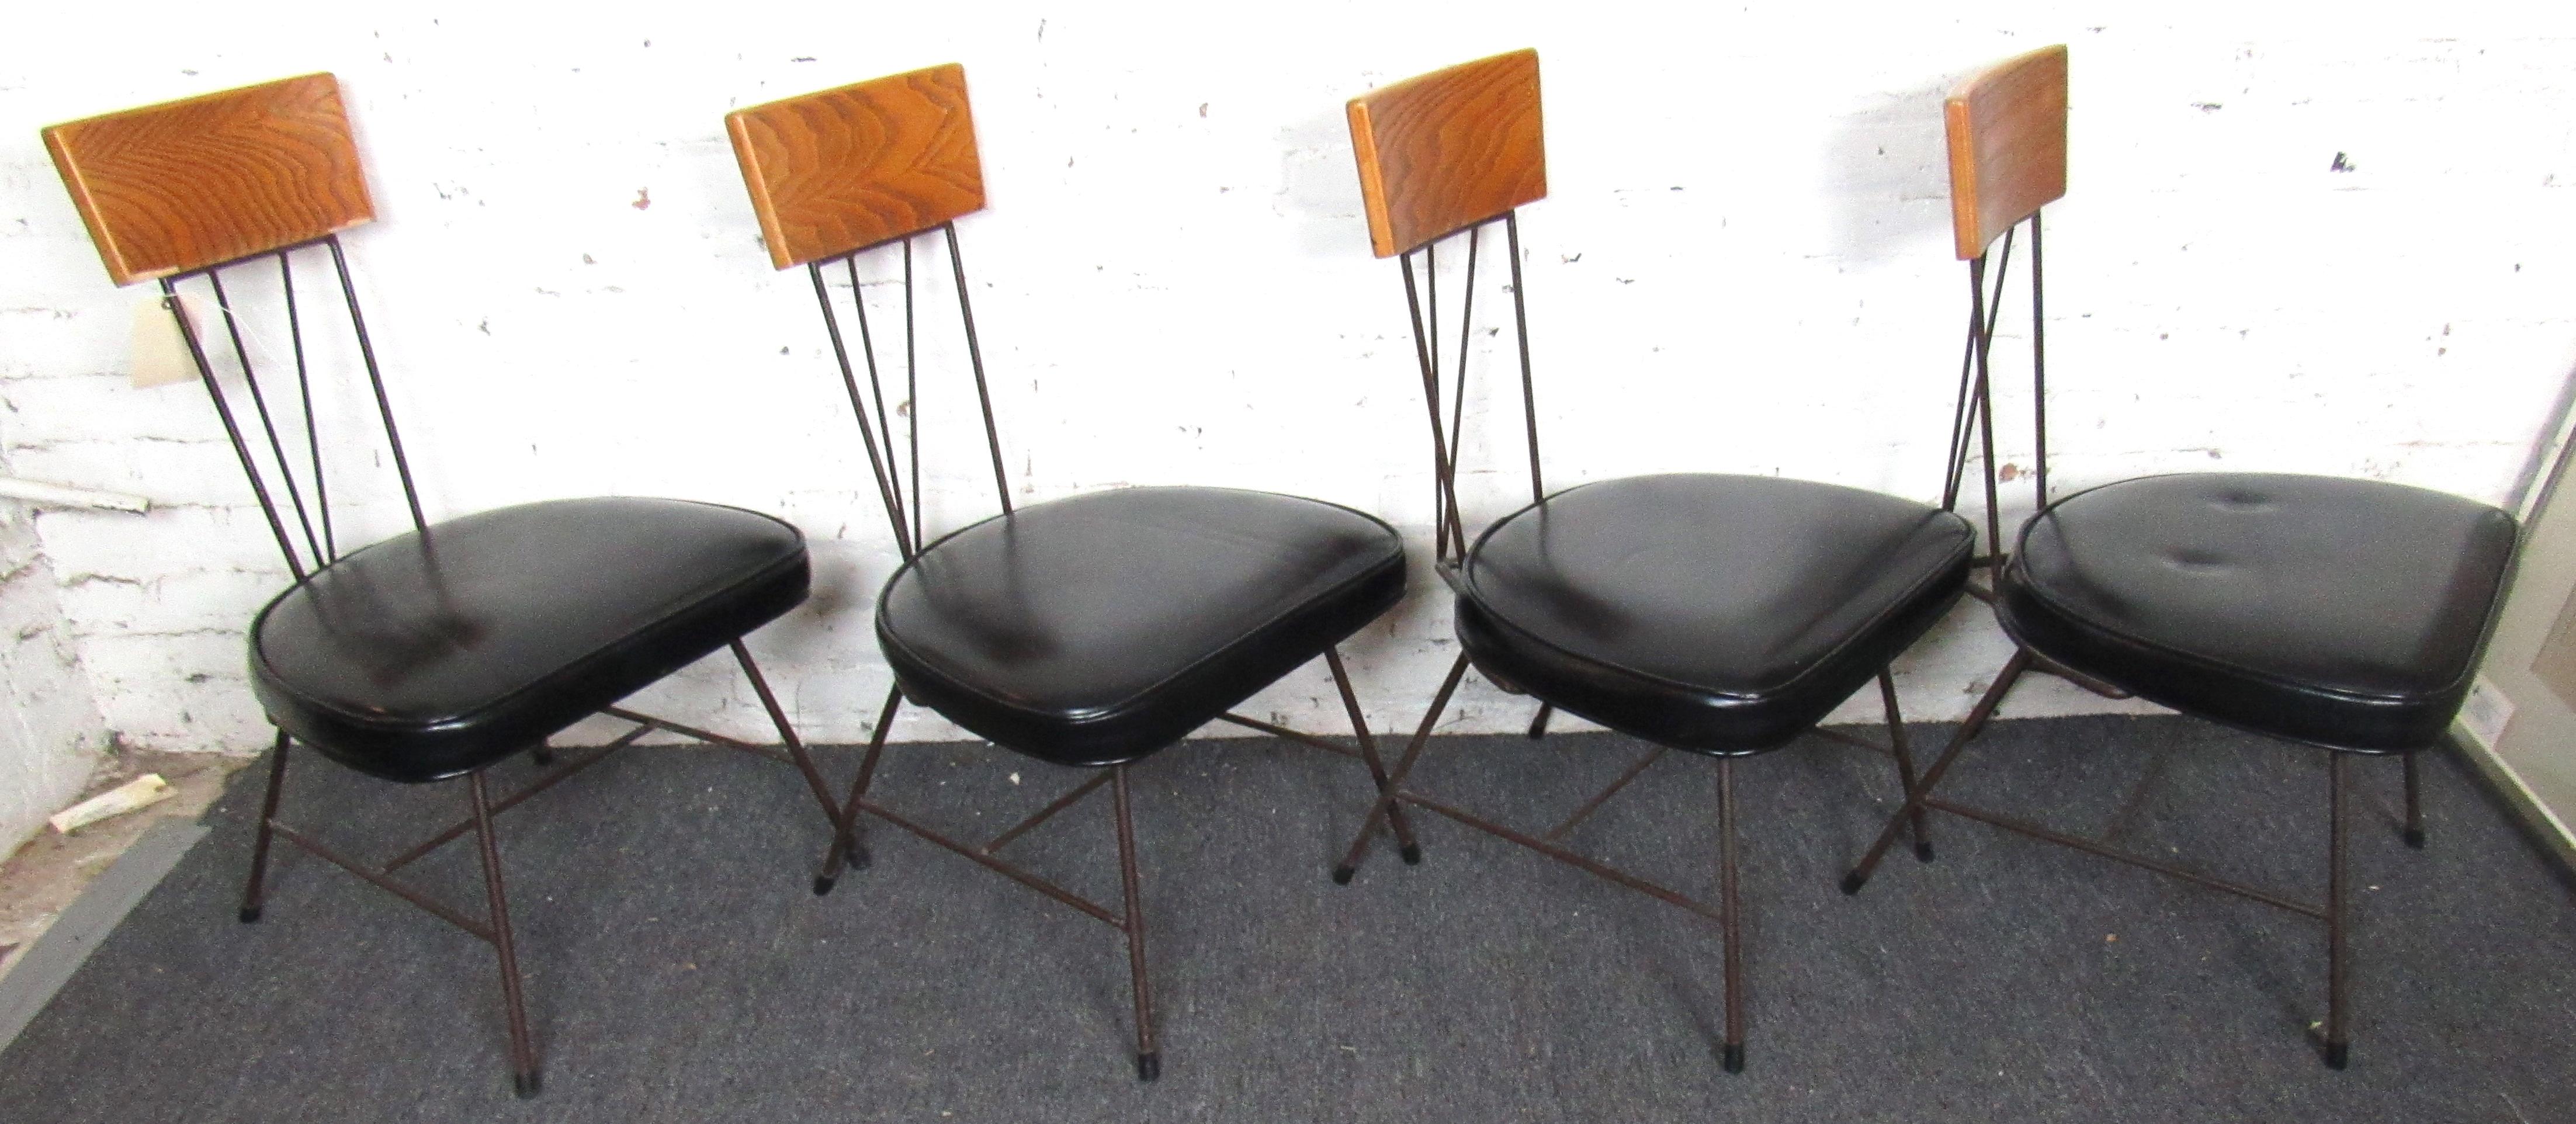 Set of Four Mid-Century Modern Wood & Vinyl Dining Chairs 8